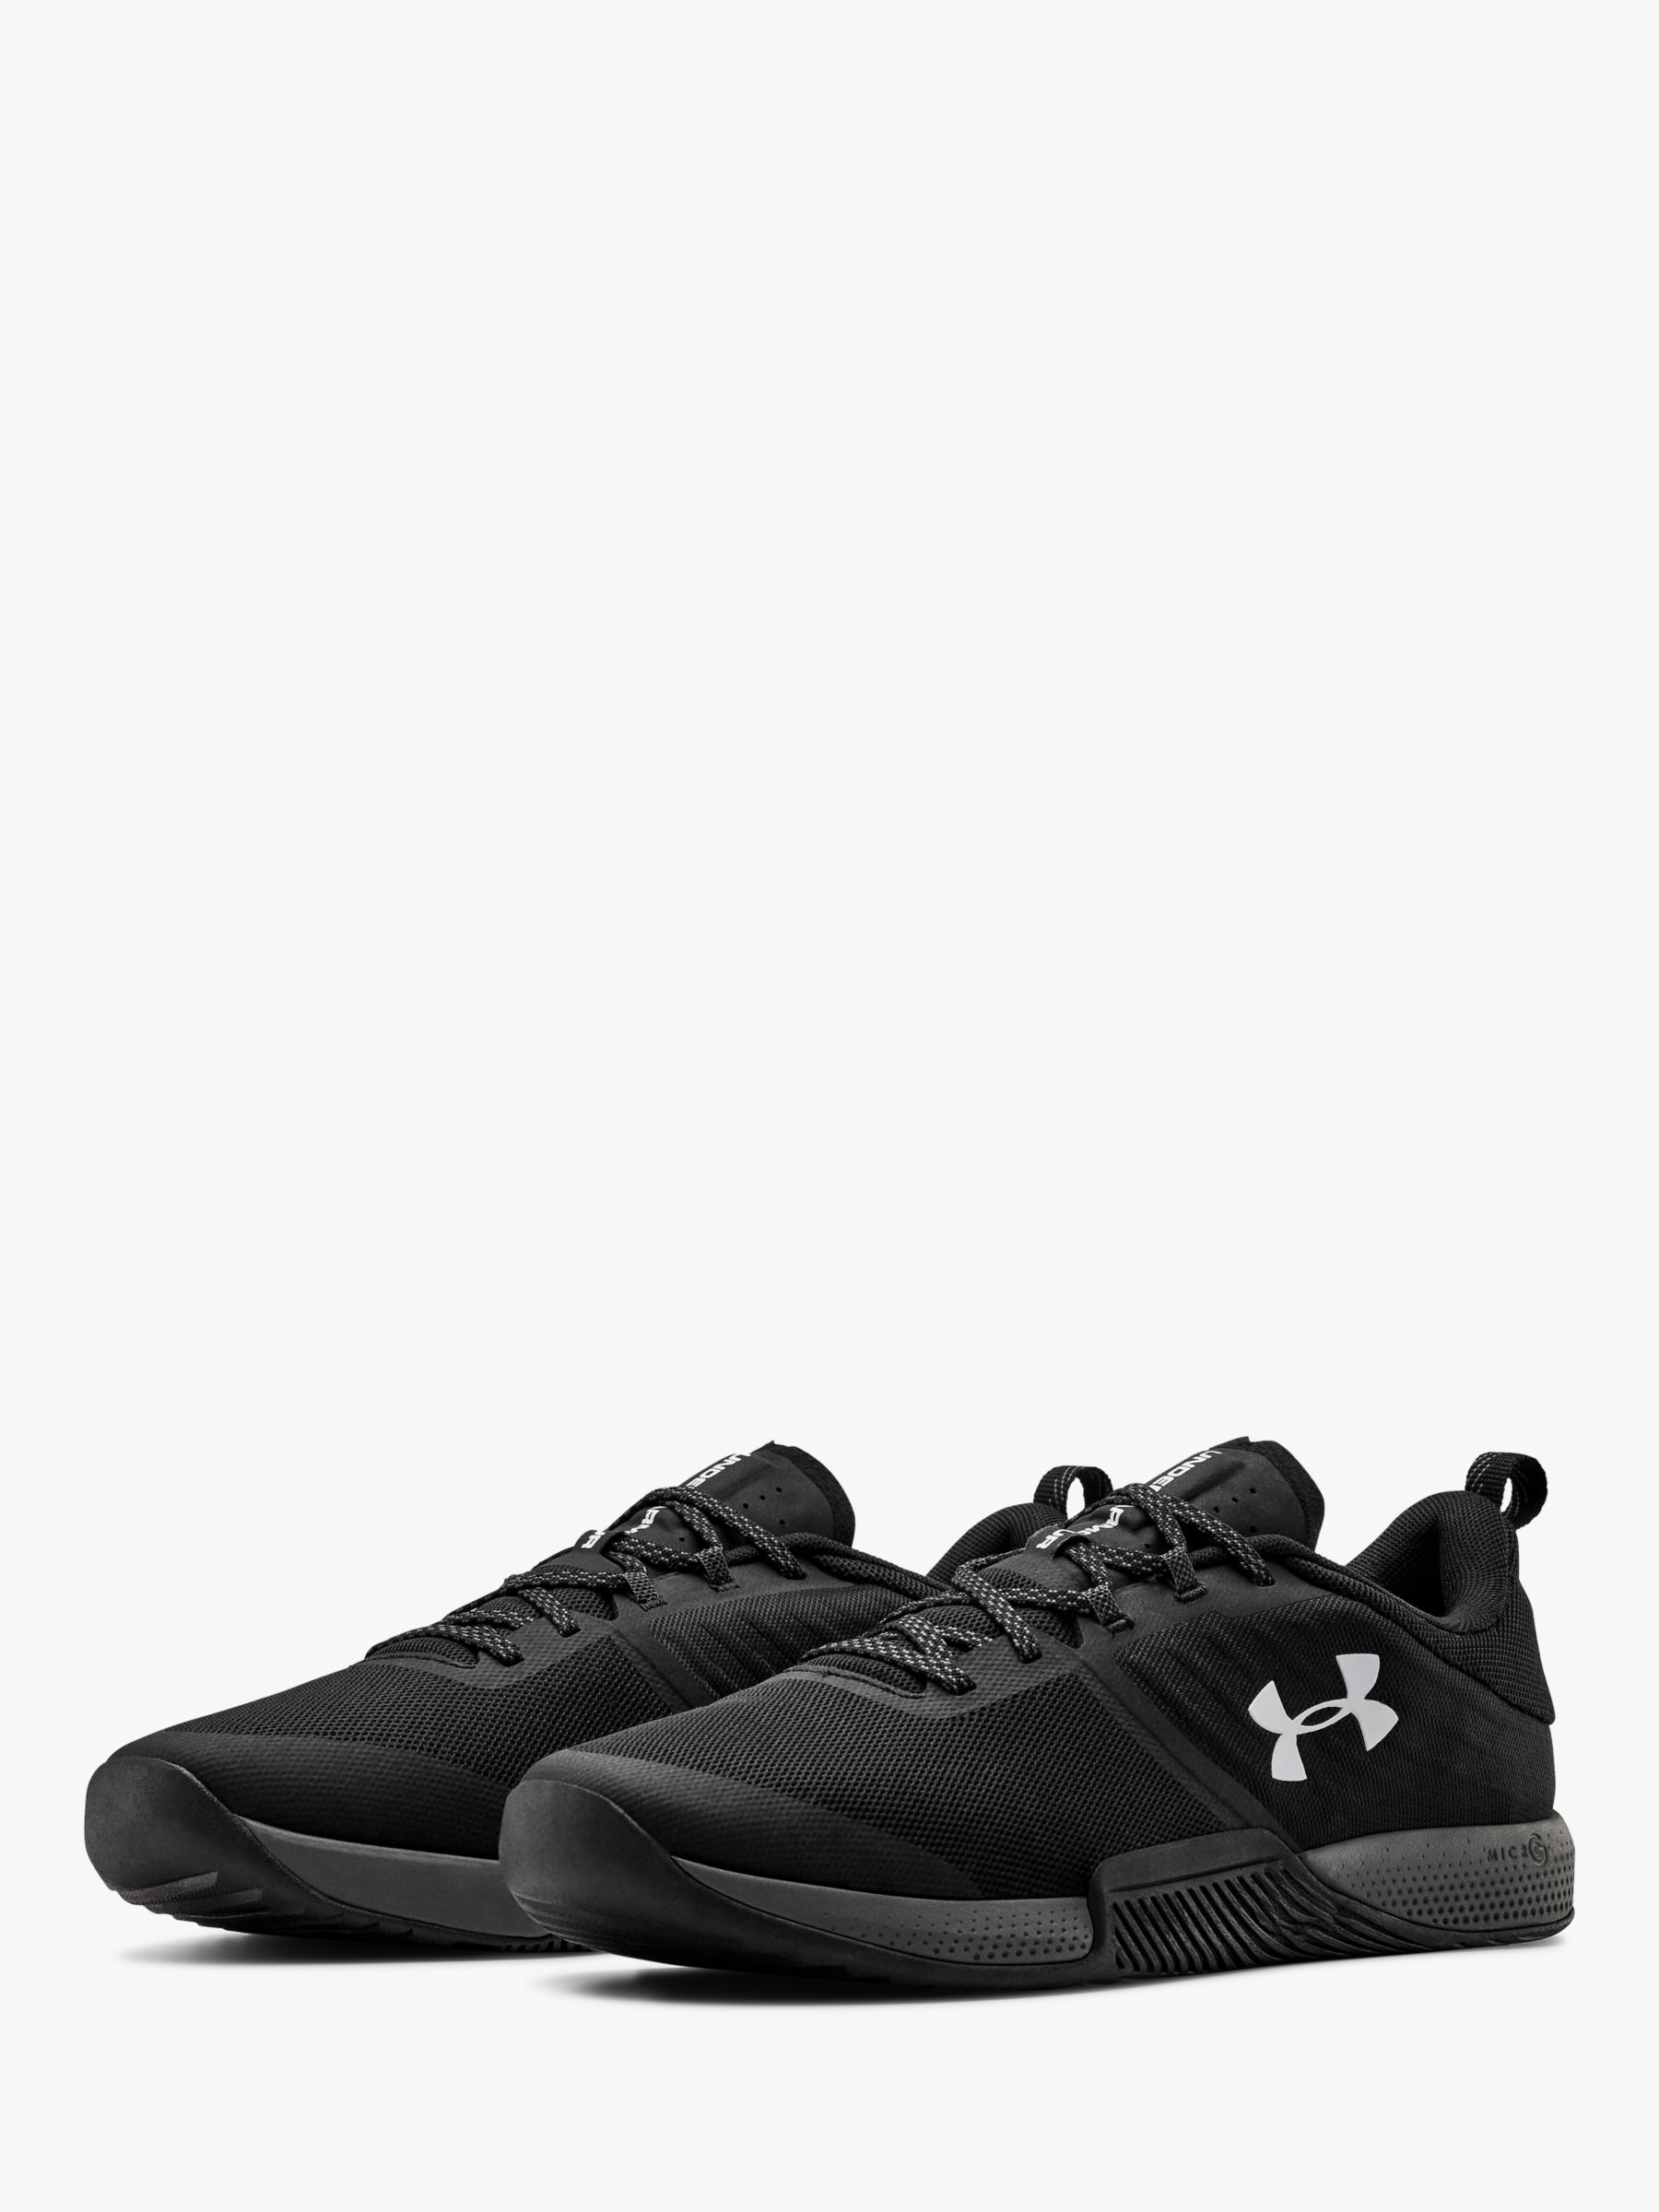 under armour men's tribase thrive cross trainer